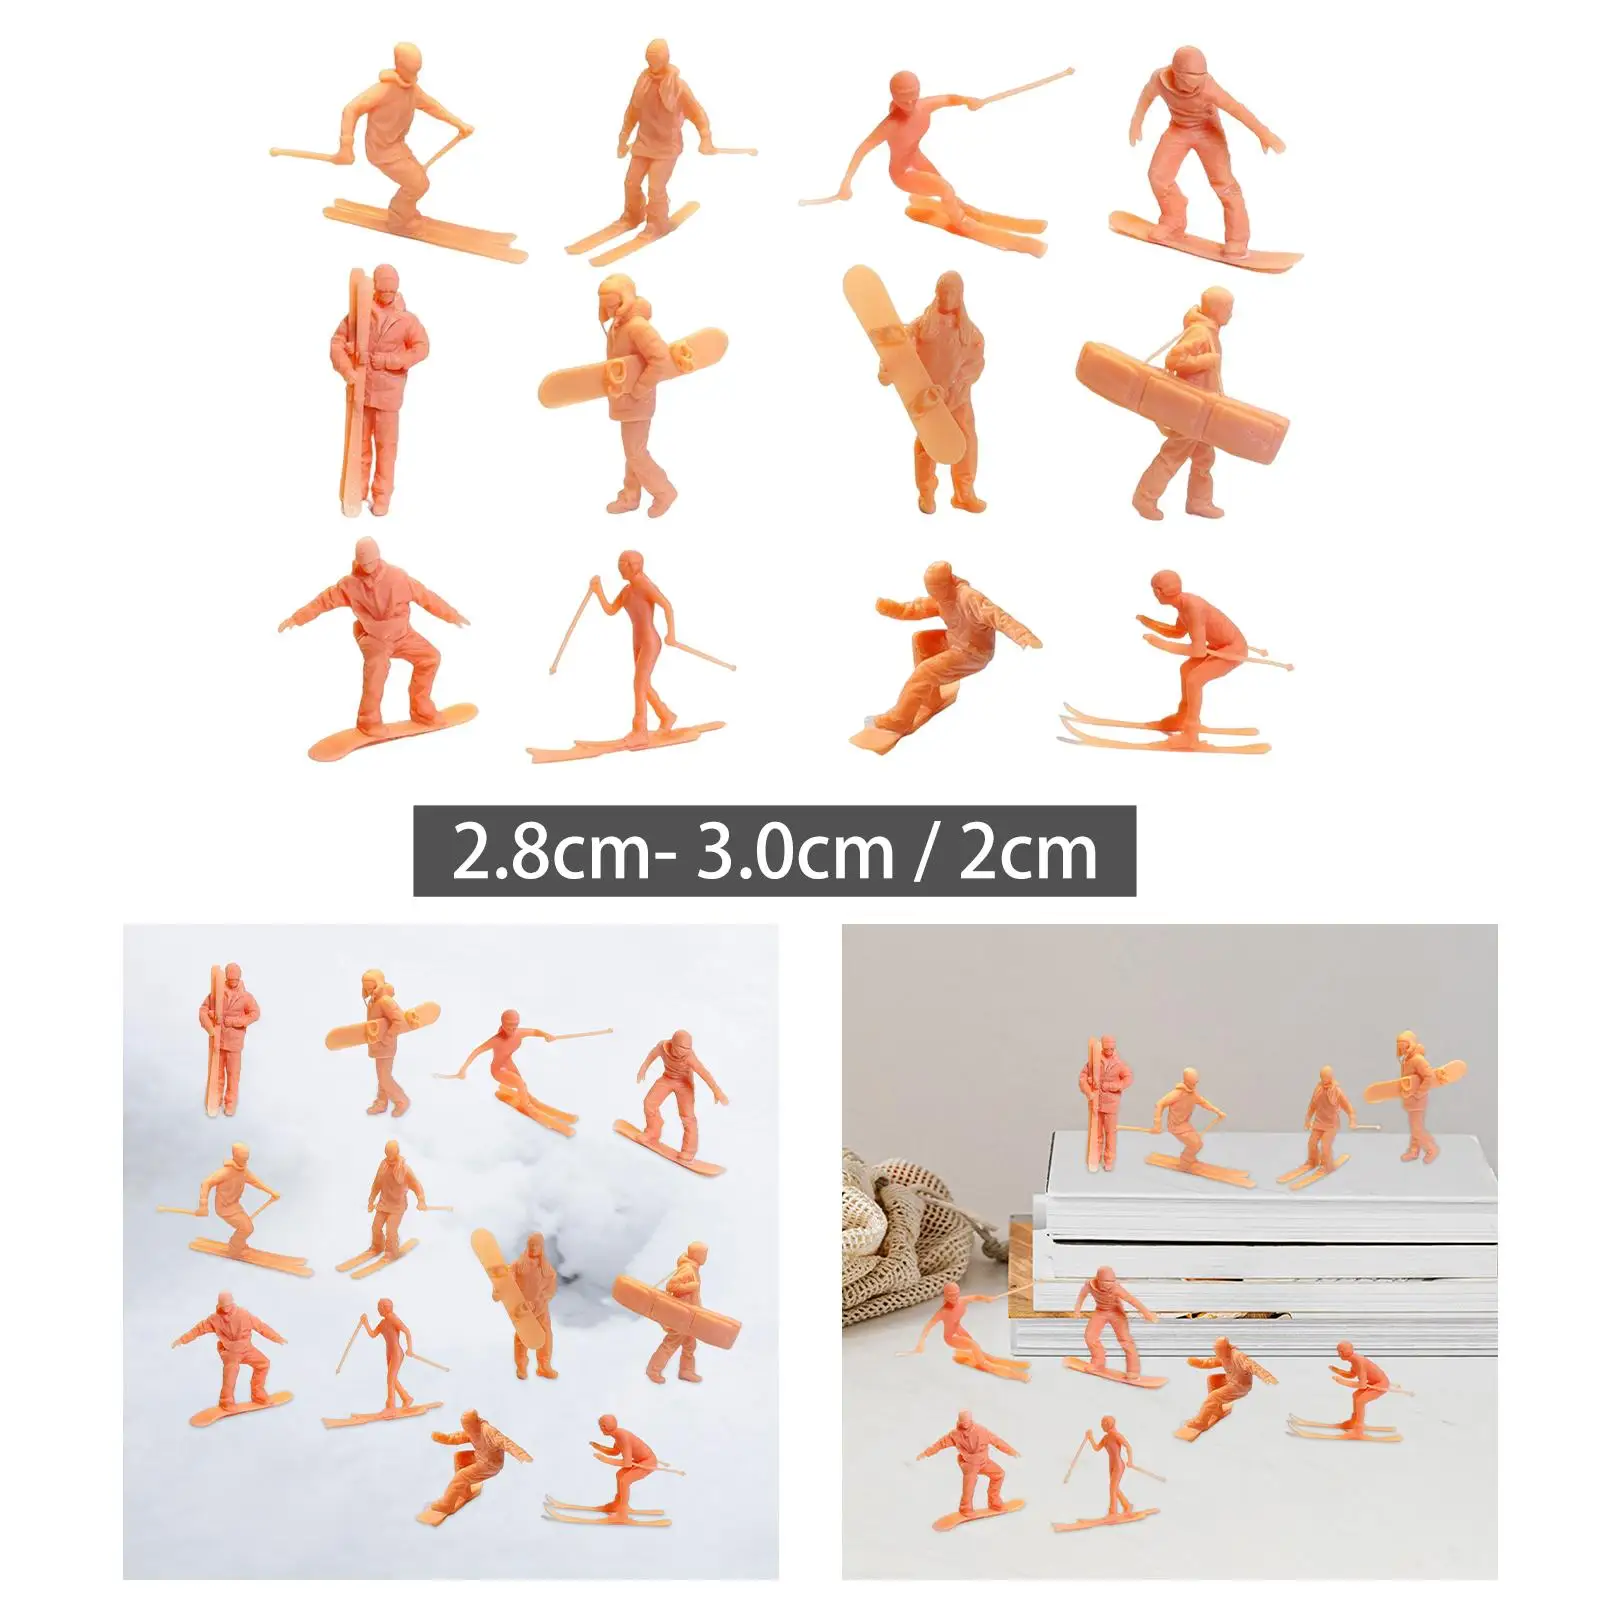 Simulation Skiing Figures Doll Model for Sand Table Layout Desk Decoration